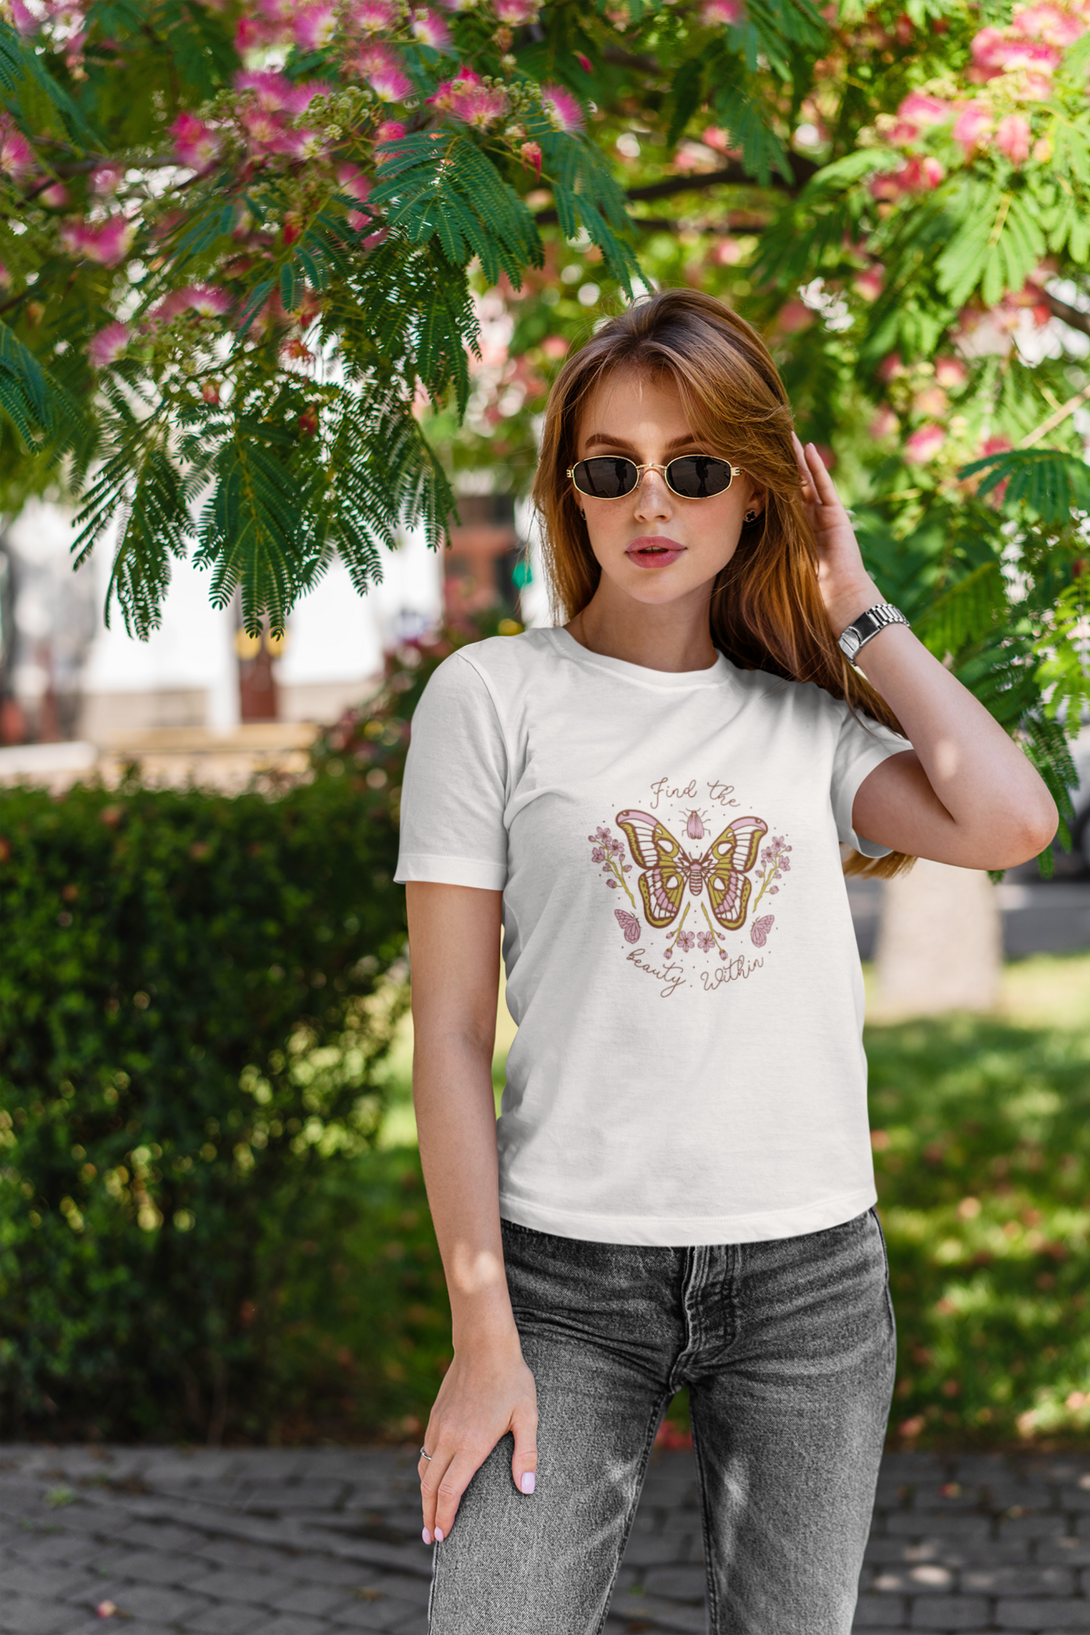 Find The Beauty Within Printed T-Shirt For Women - WowWaves - 3